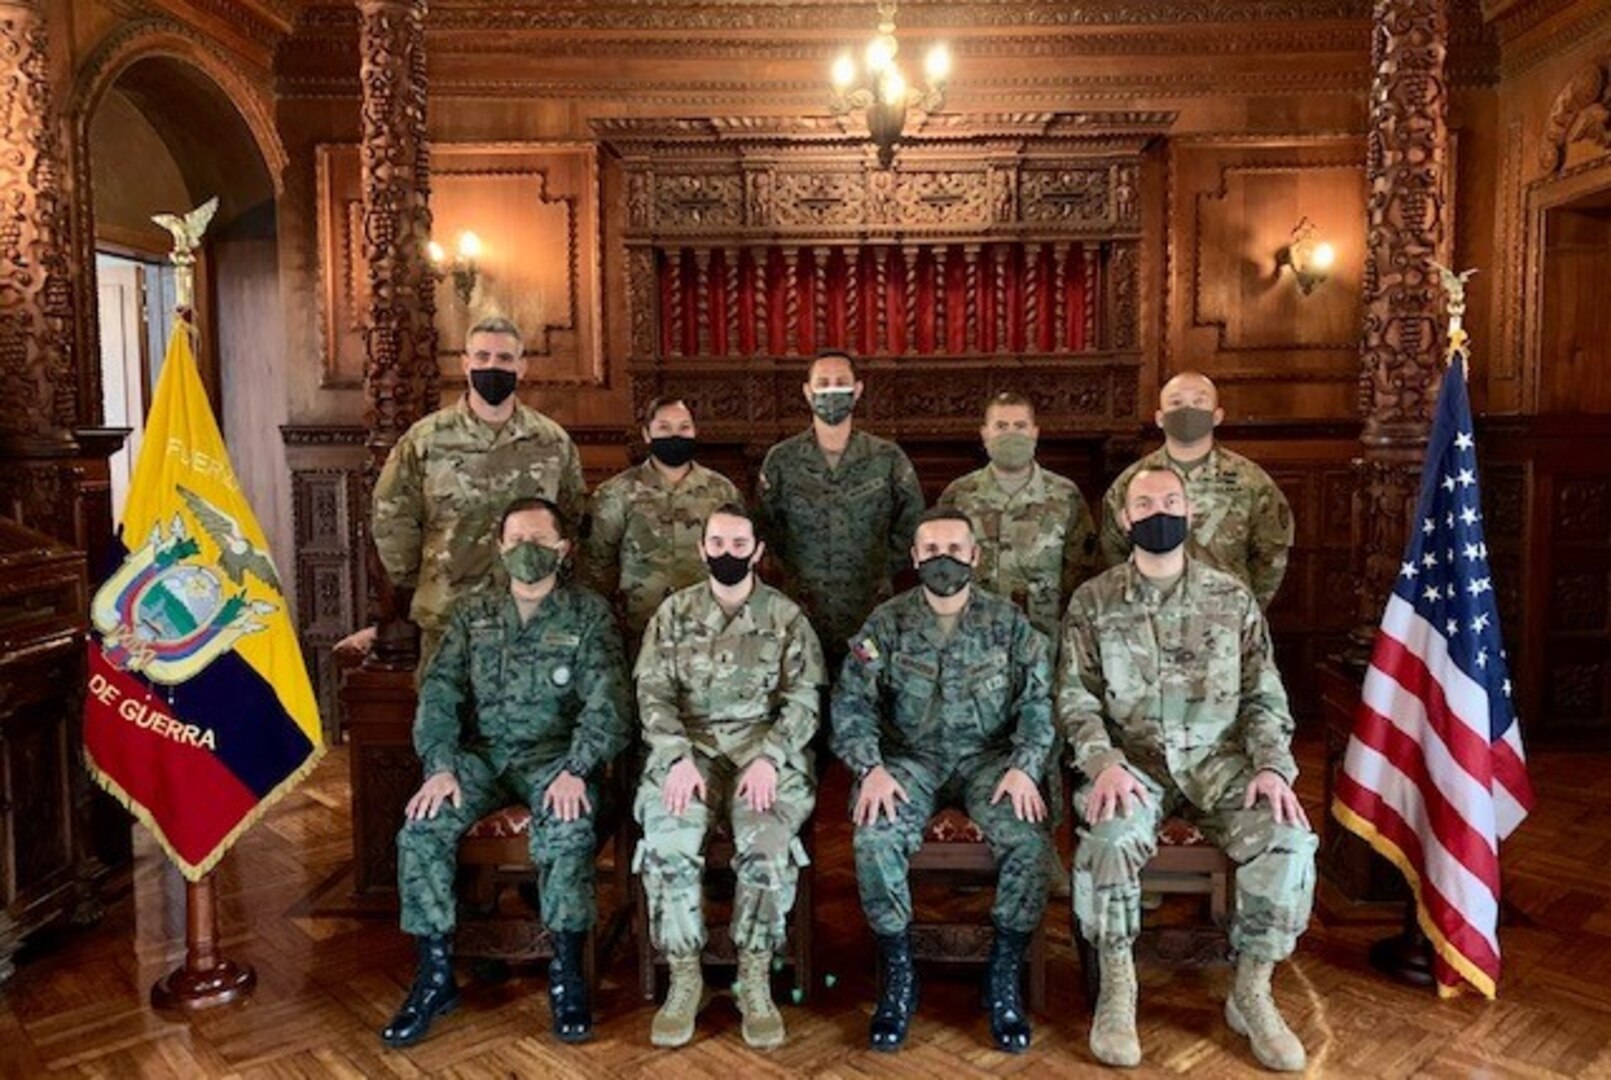 Eight military members pose for photo.